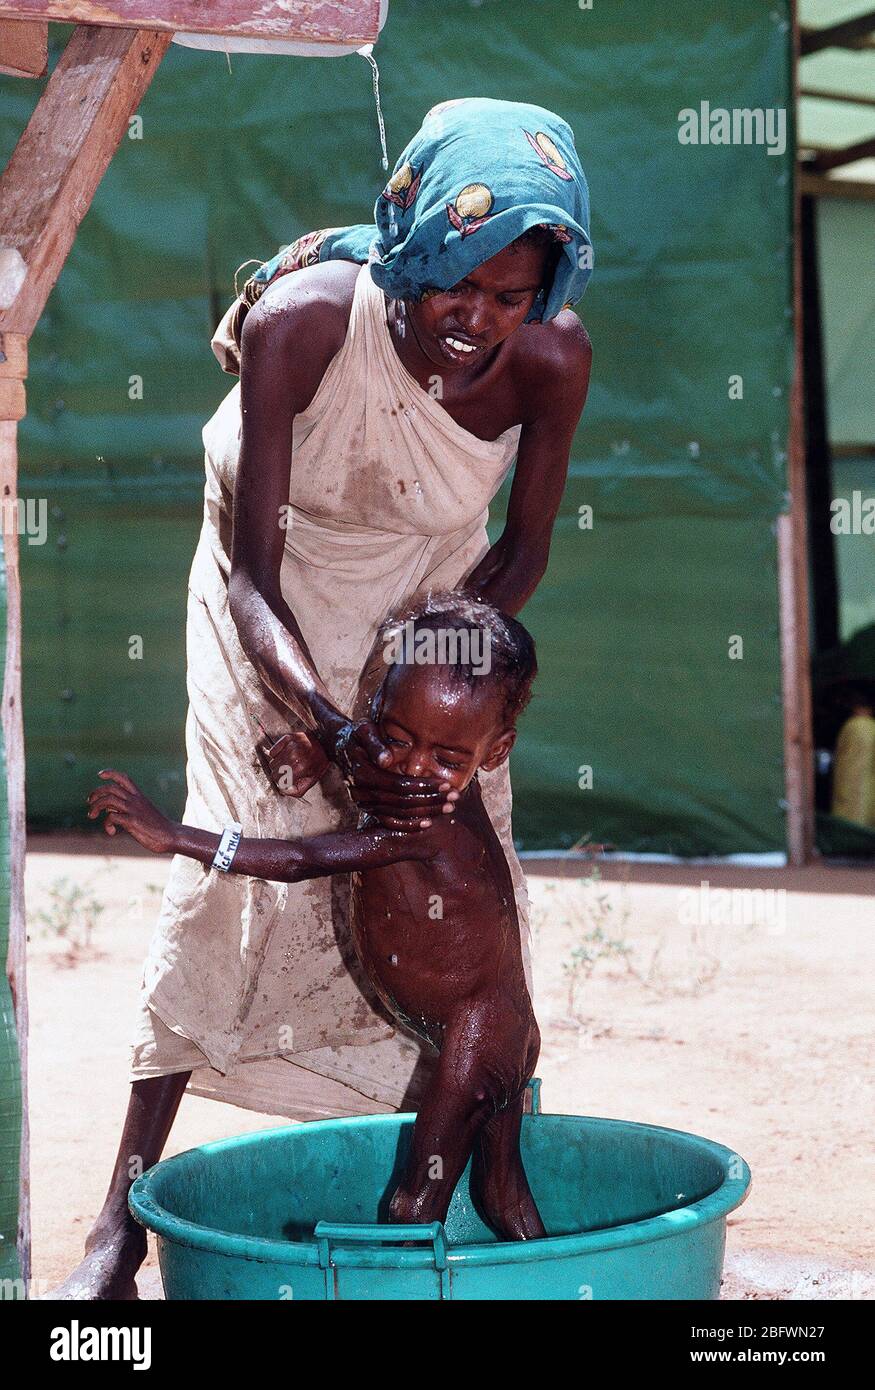 1993 - A Somali mother bathes her infant in an aid station set up during Operation Restore Hope relief efforts. Stock Photo